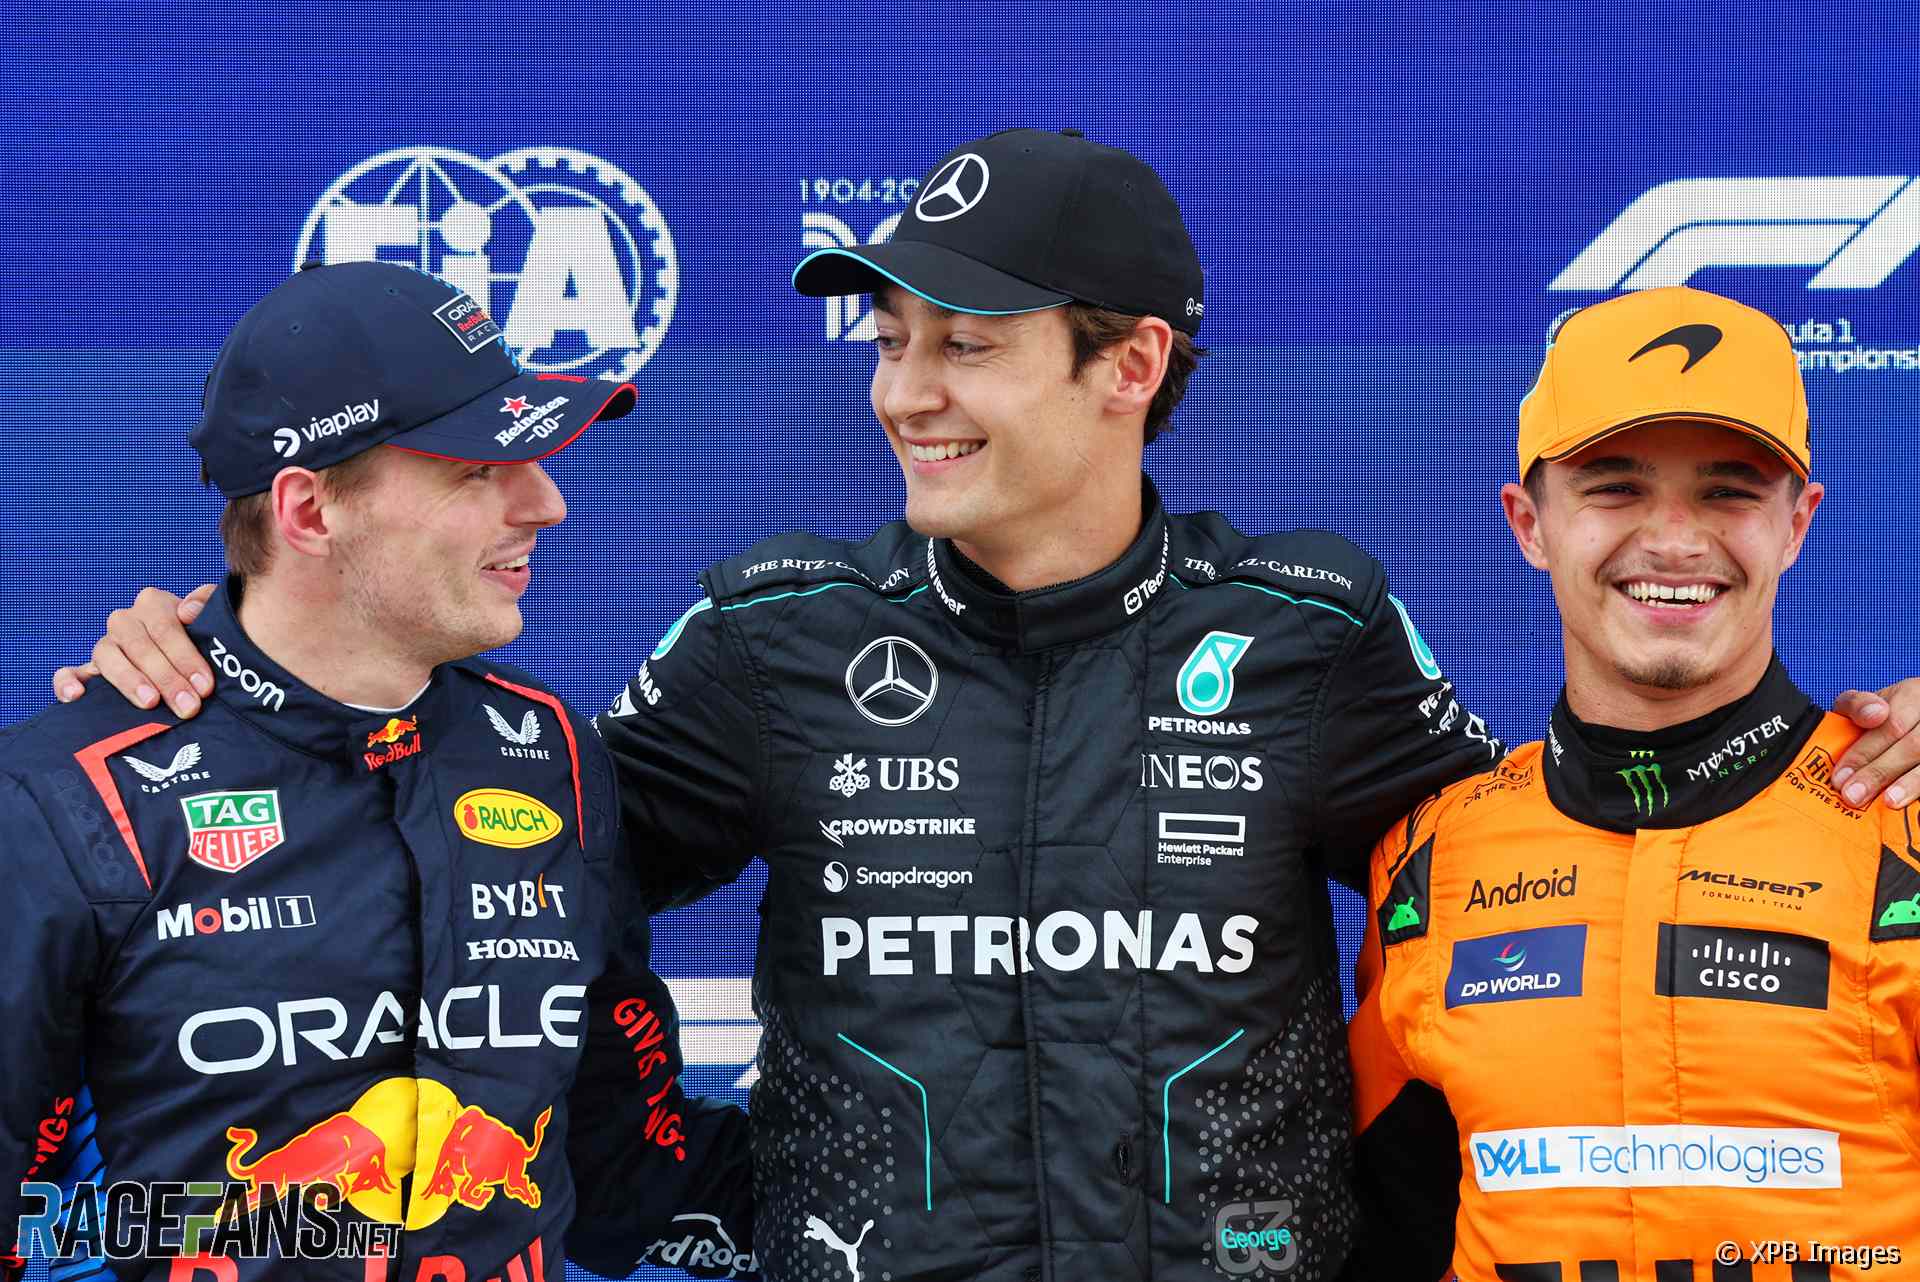 The Top Three Qualifiers : Second Place Max Verstappen (Red Bull Racing), Pole Position George Russell (Mercedes AMG F1 Team) and Third Place Lando Norris (McLaren F1 Team)